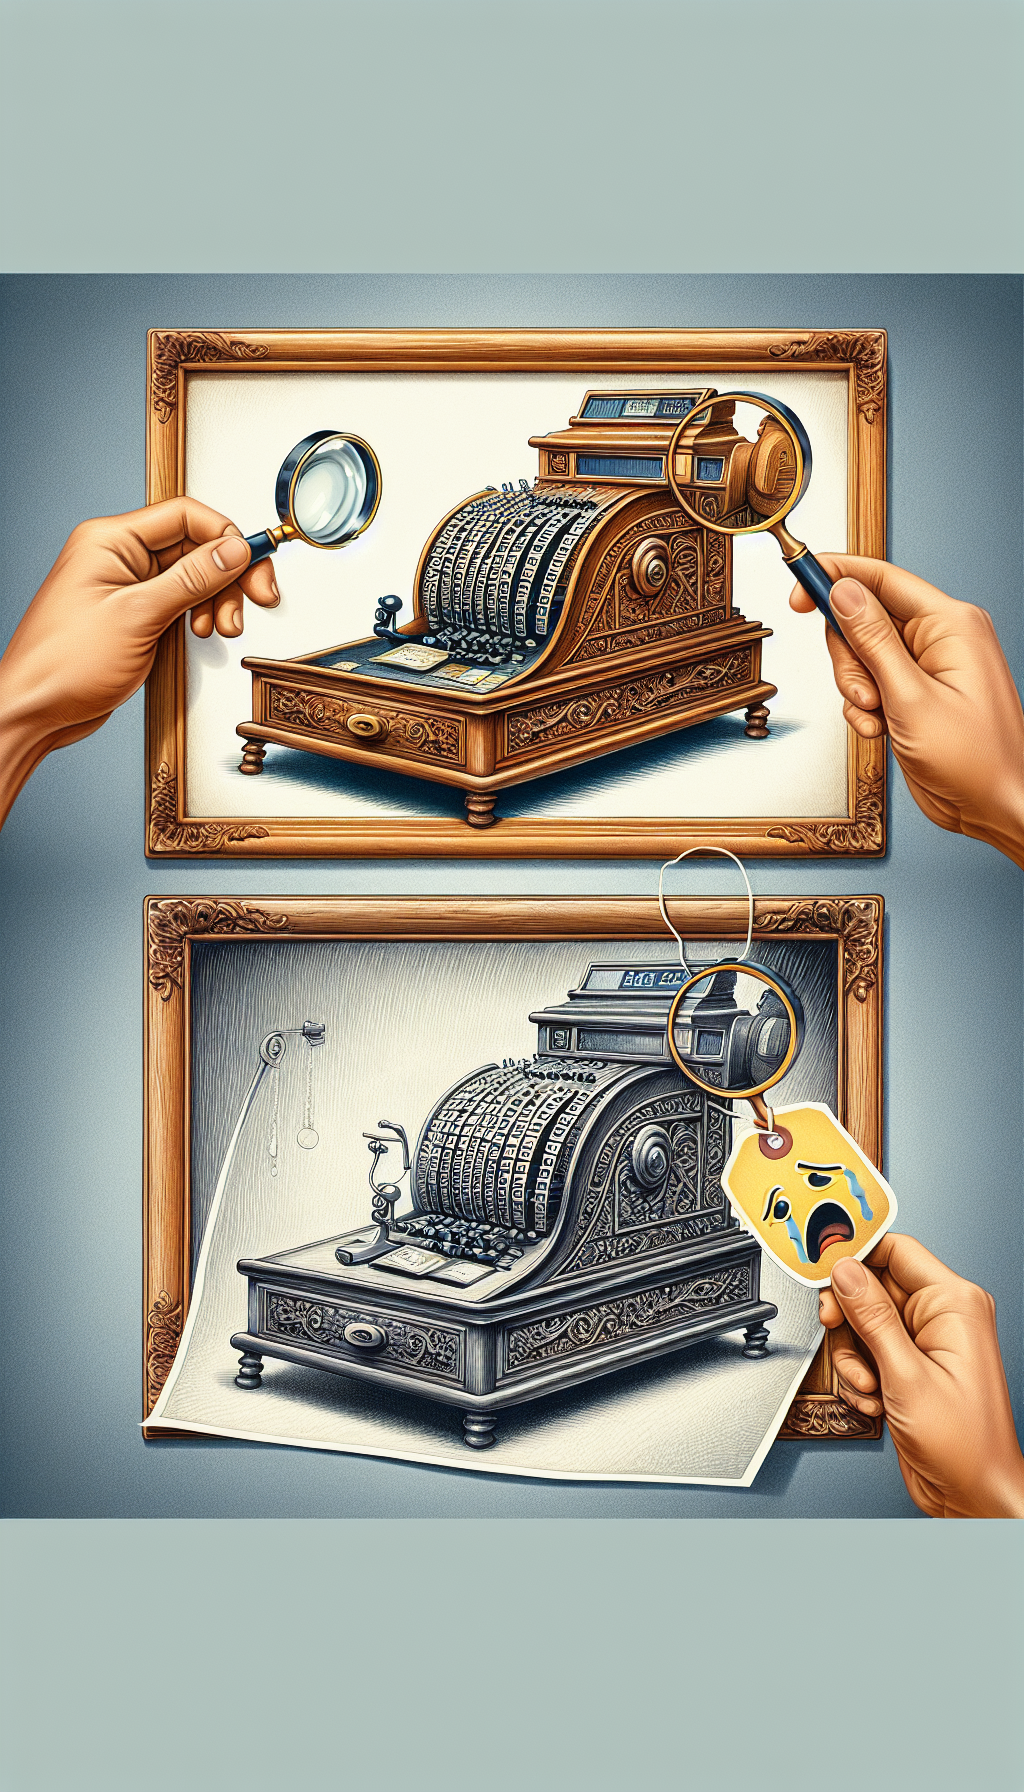 An elegantly drawn split-frame illustration where one side depicts a finely detailed, pristine antique cash register with a magnifying glass focusing on its exquisite craftsmanship, while the other side shows the same model in a neglected state with visible rust and damage, a price tag hanging off it with a significantly lower value to represent its condition.